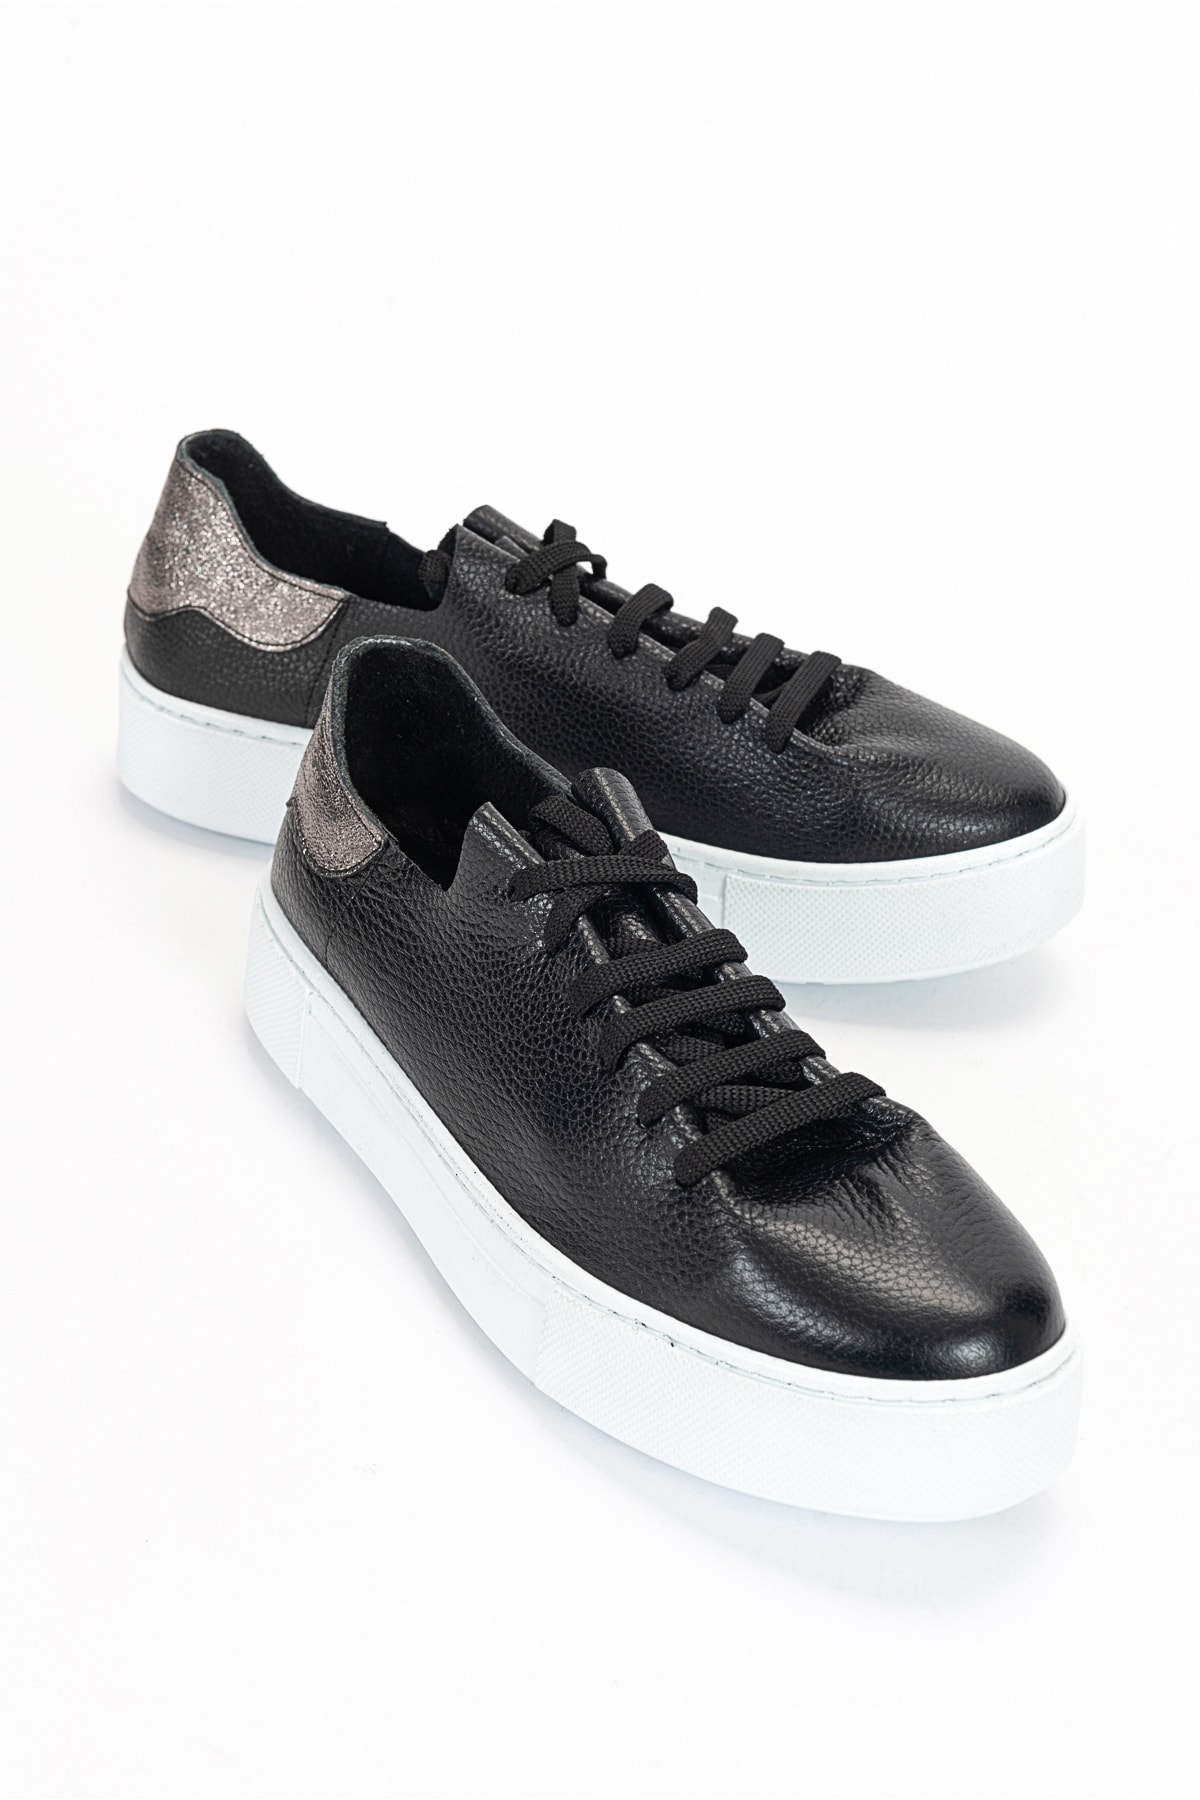 LuviShoes 155 Women's Sneakers From Genuine Leather, Black Platinum.